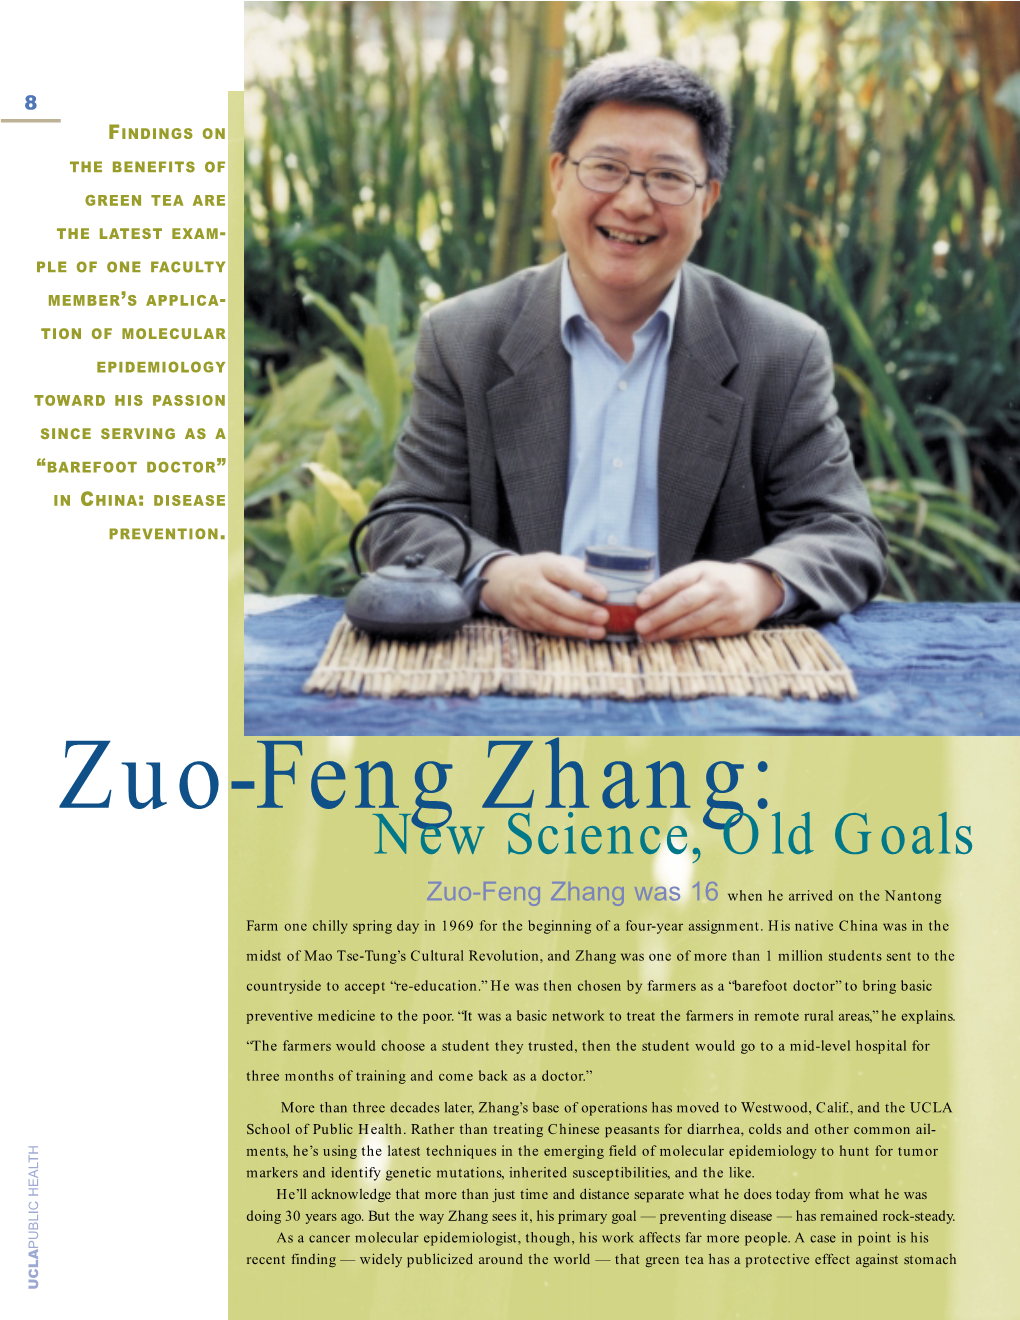 Zuo-Feng Zhang: New Science, Old Goals